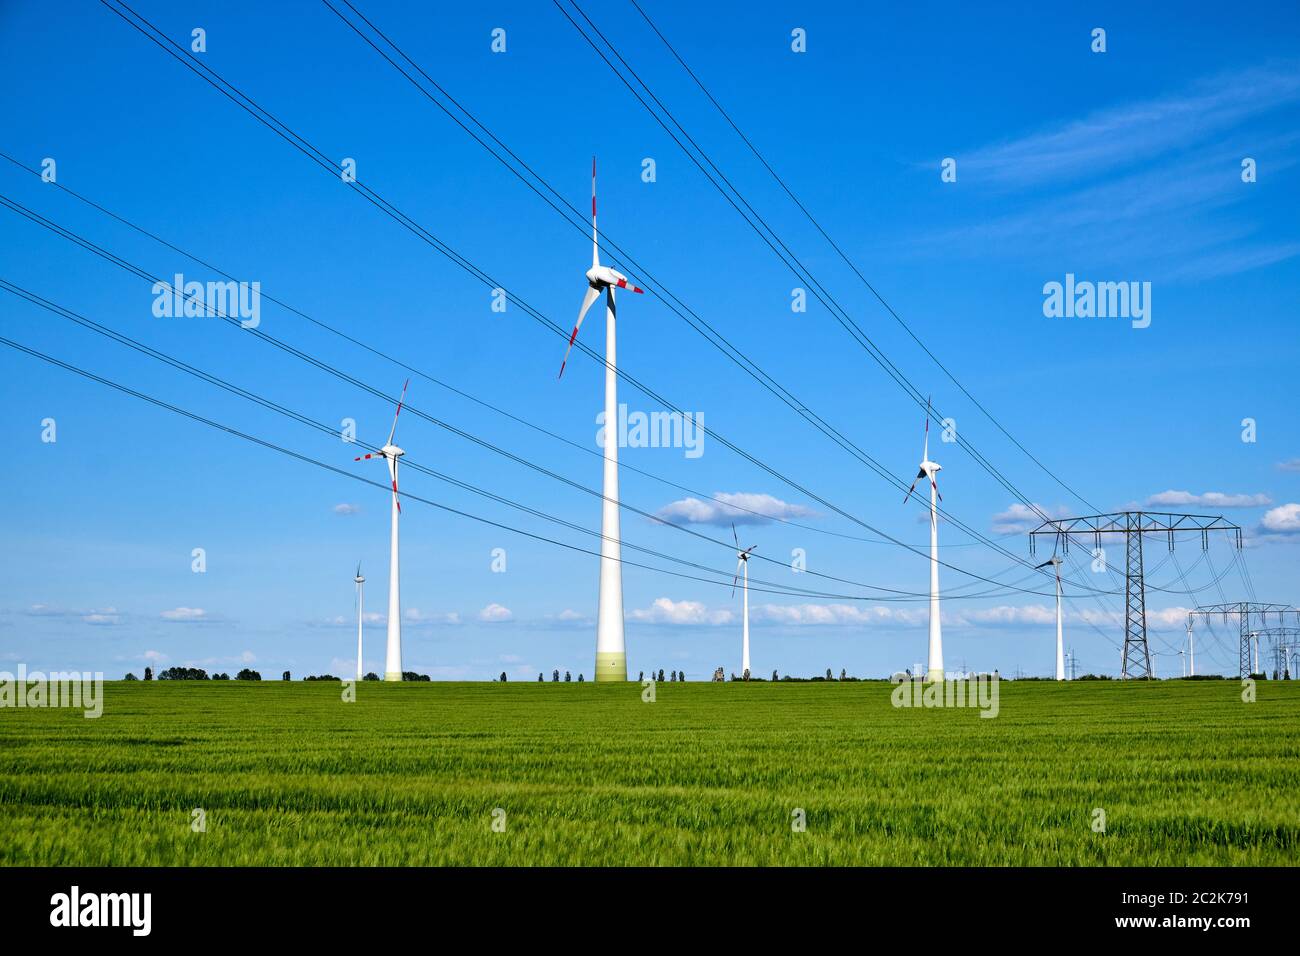 Power lines and wind engines on a sunny day seen in Germany Stock Photo